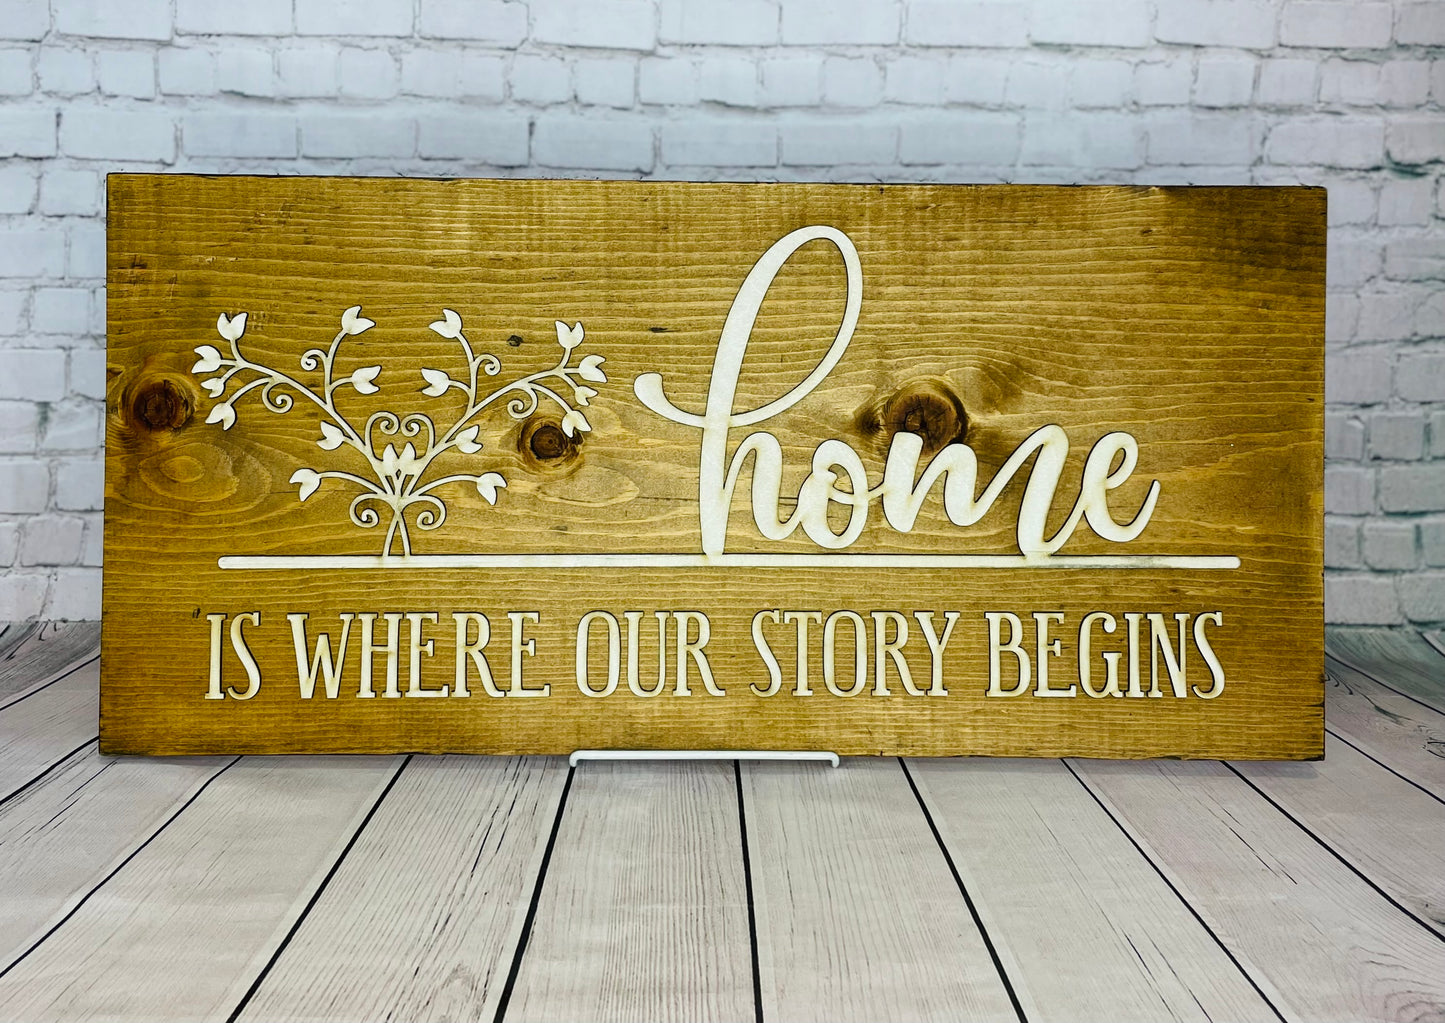 Home is where our story begins